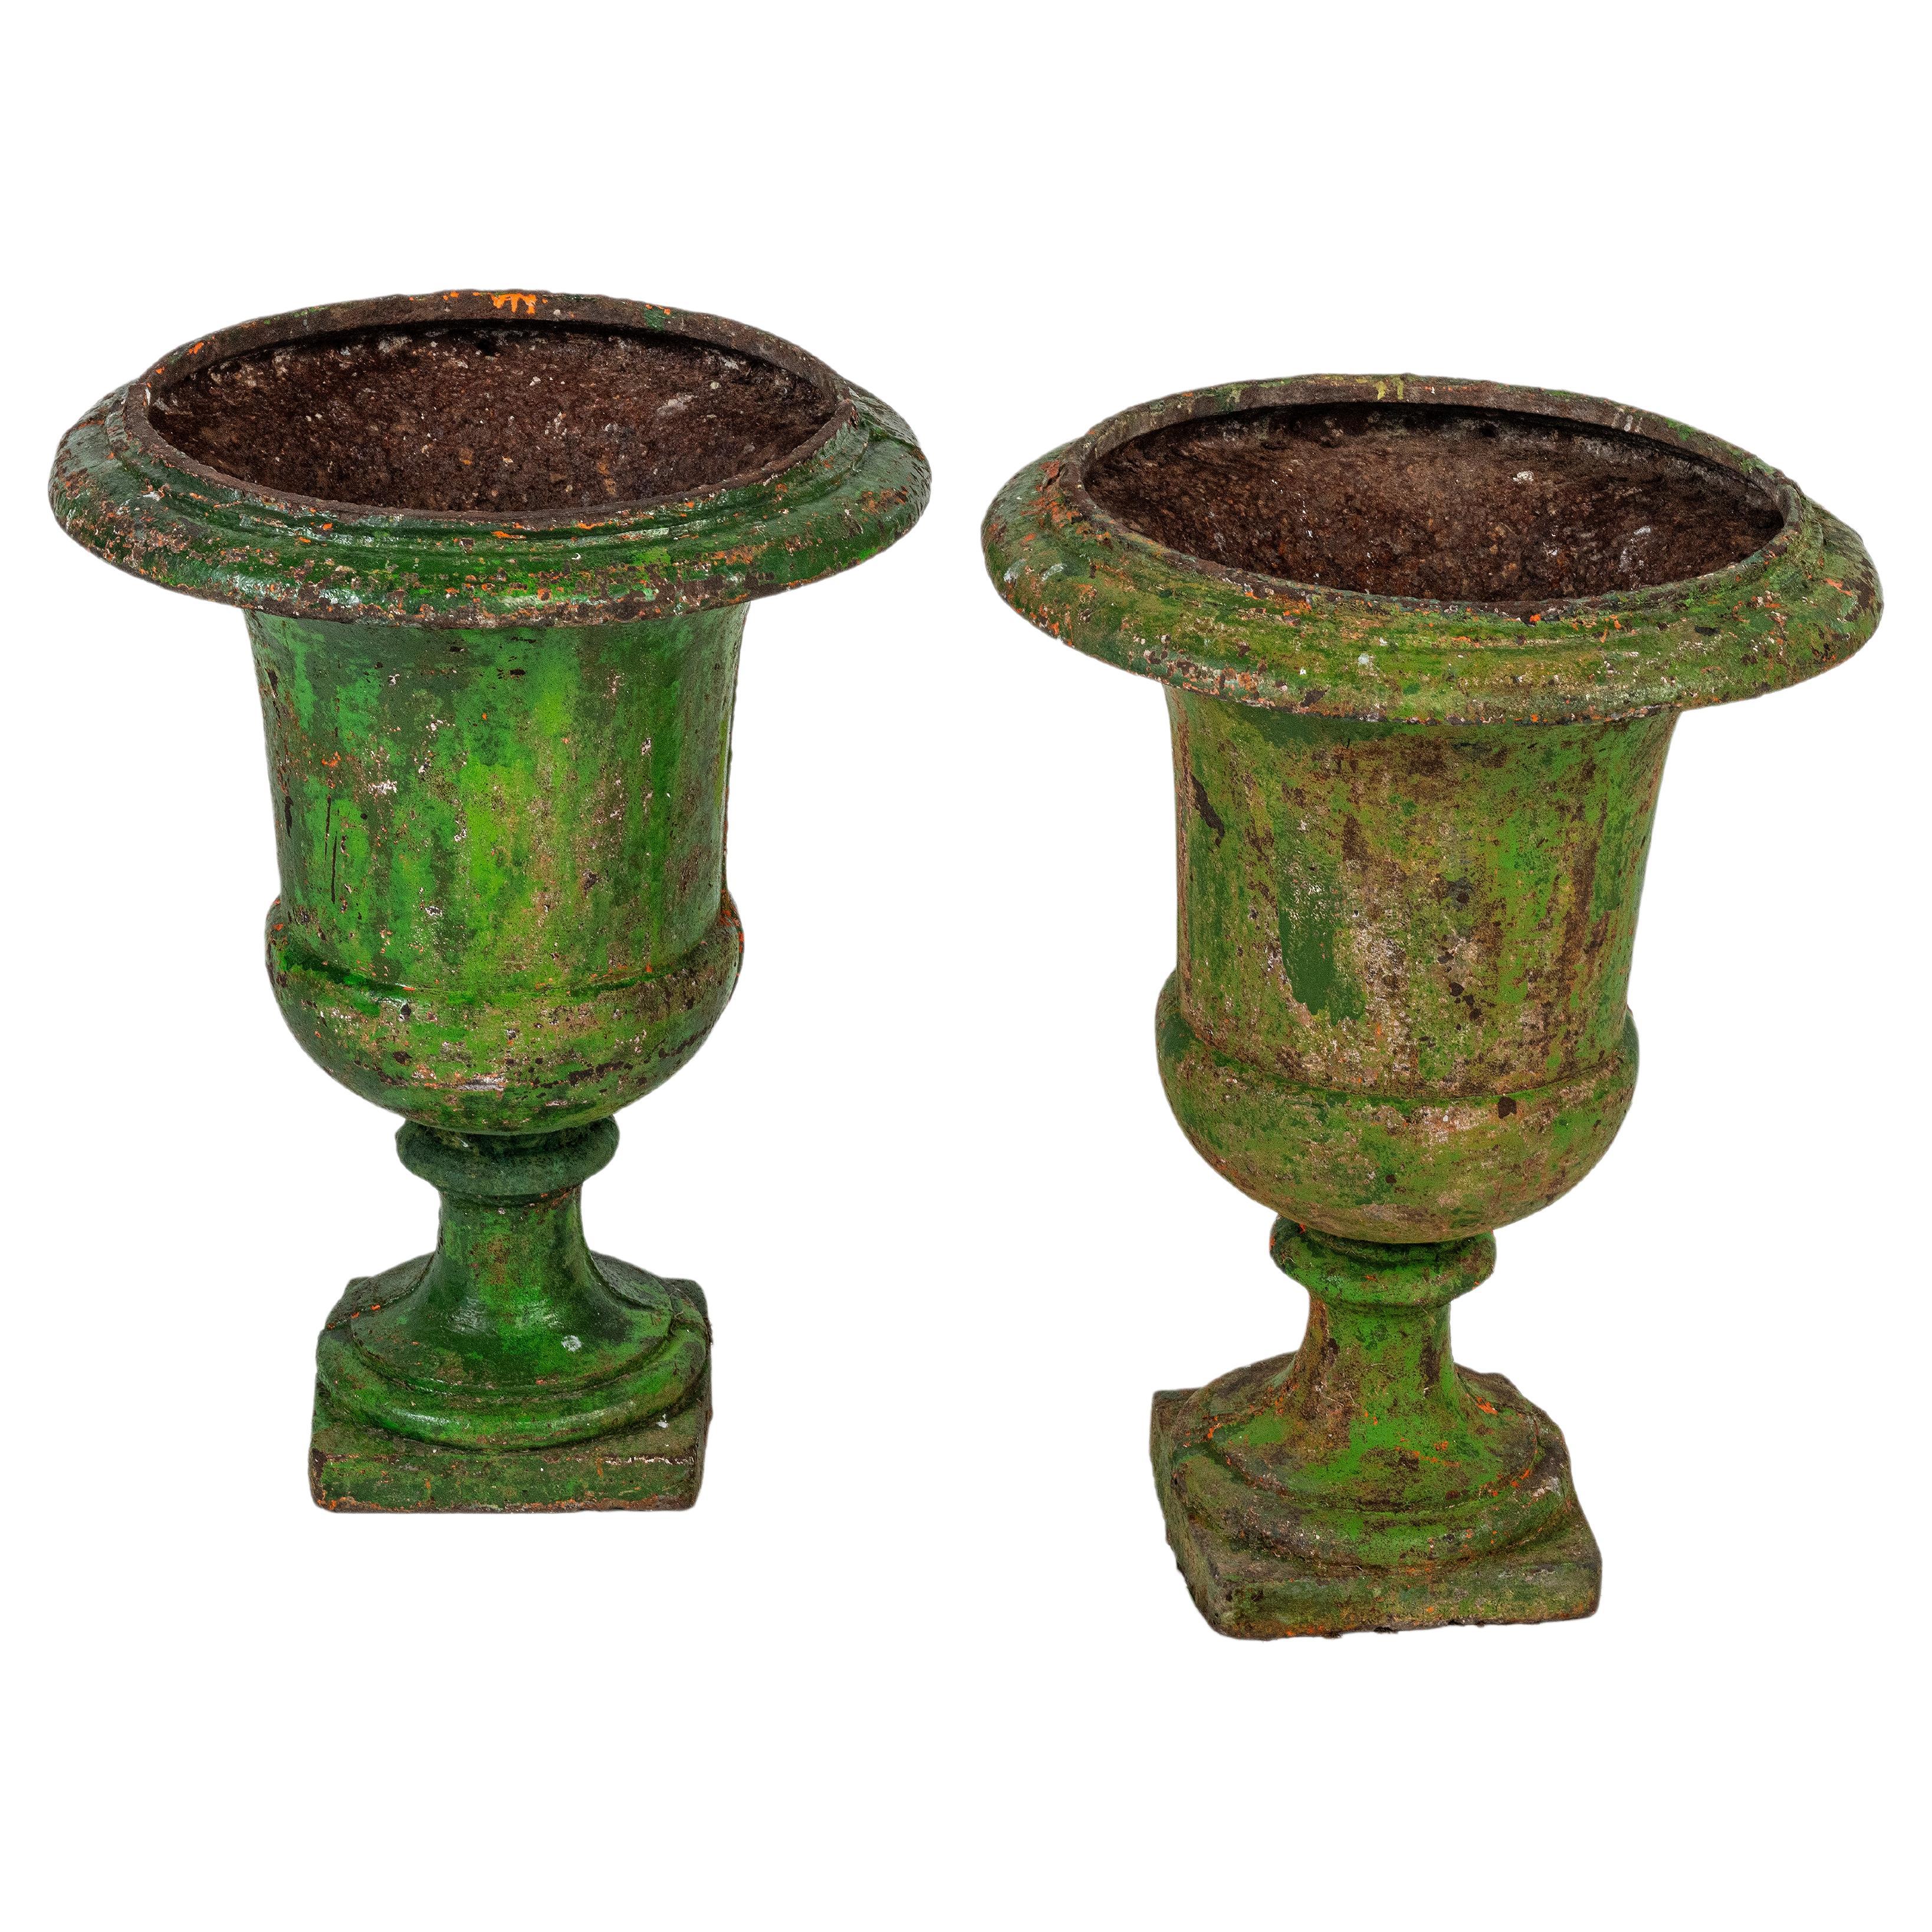 A pair of 18th century large green painted urns.